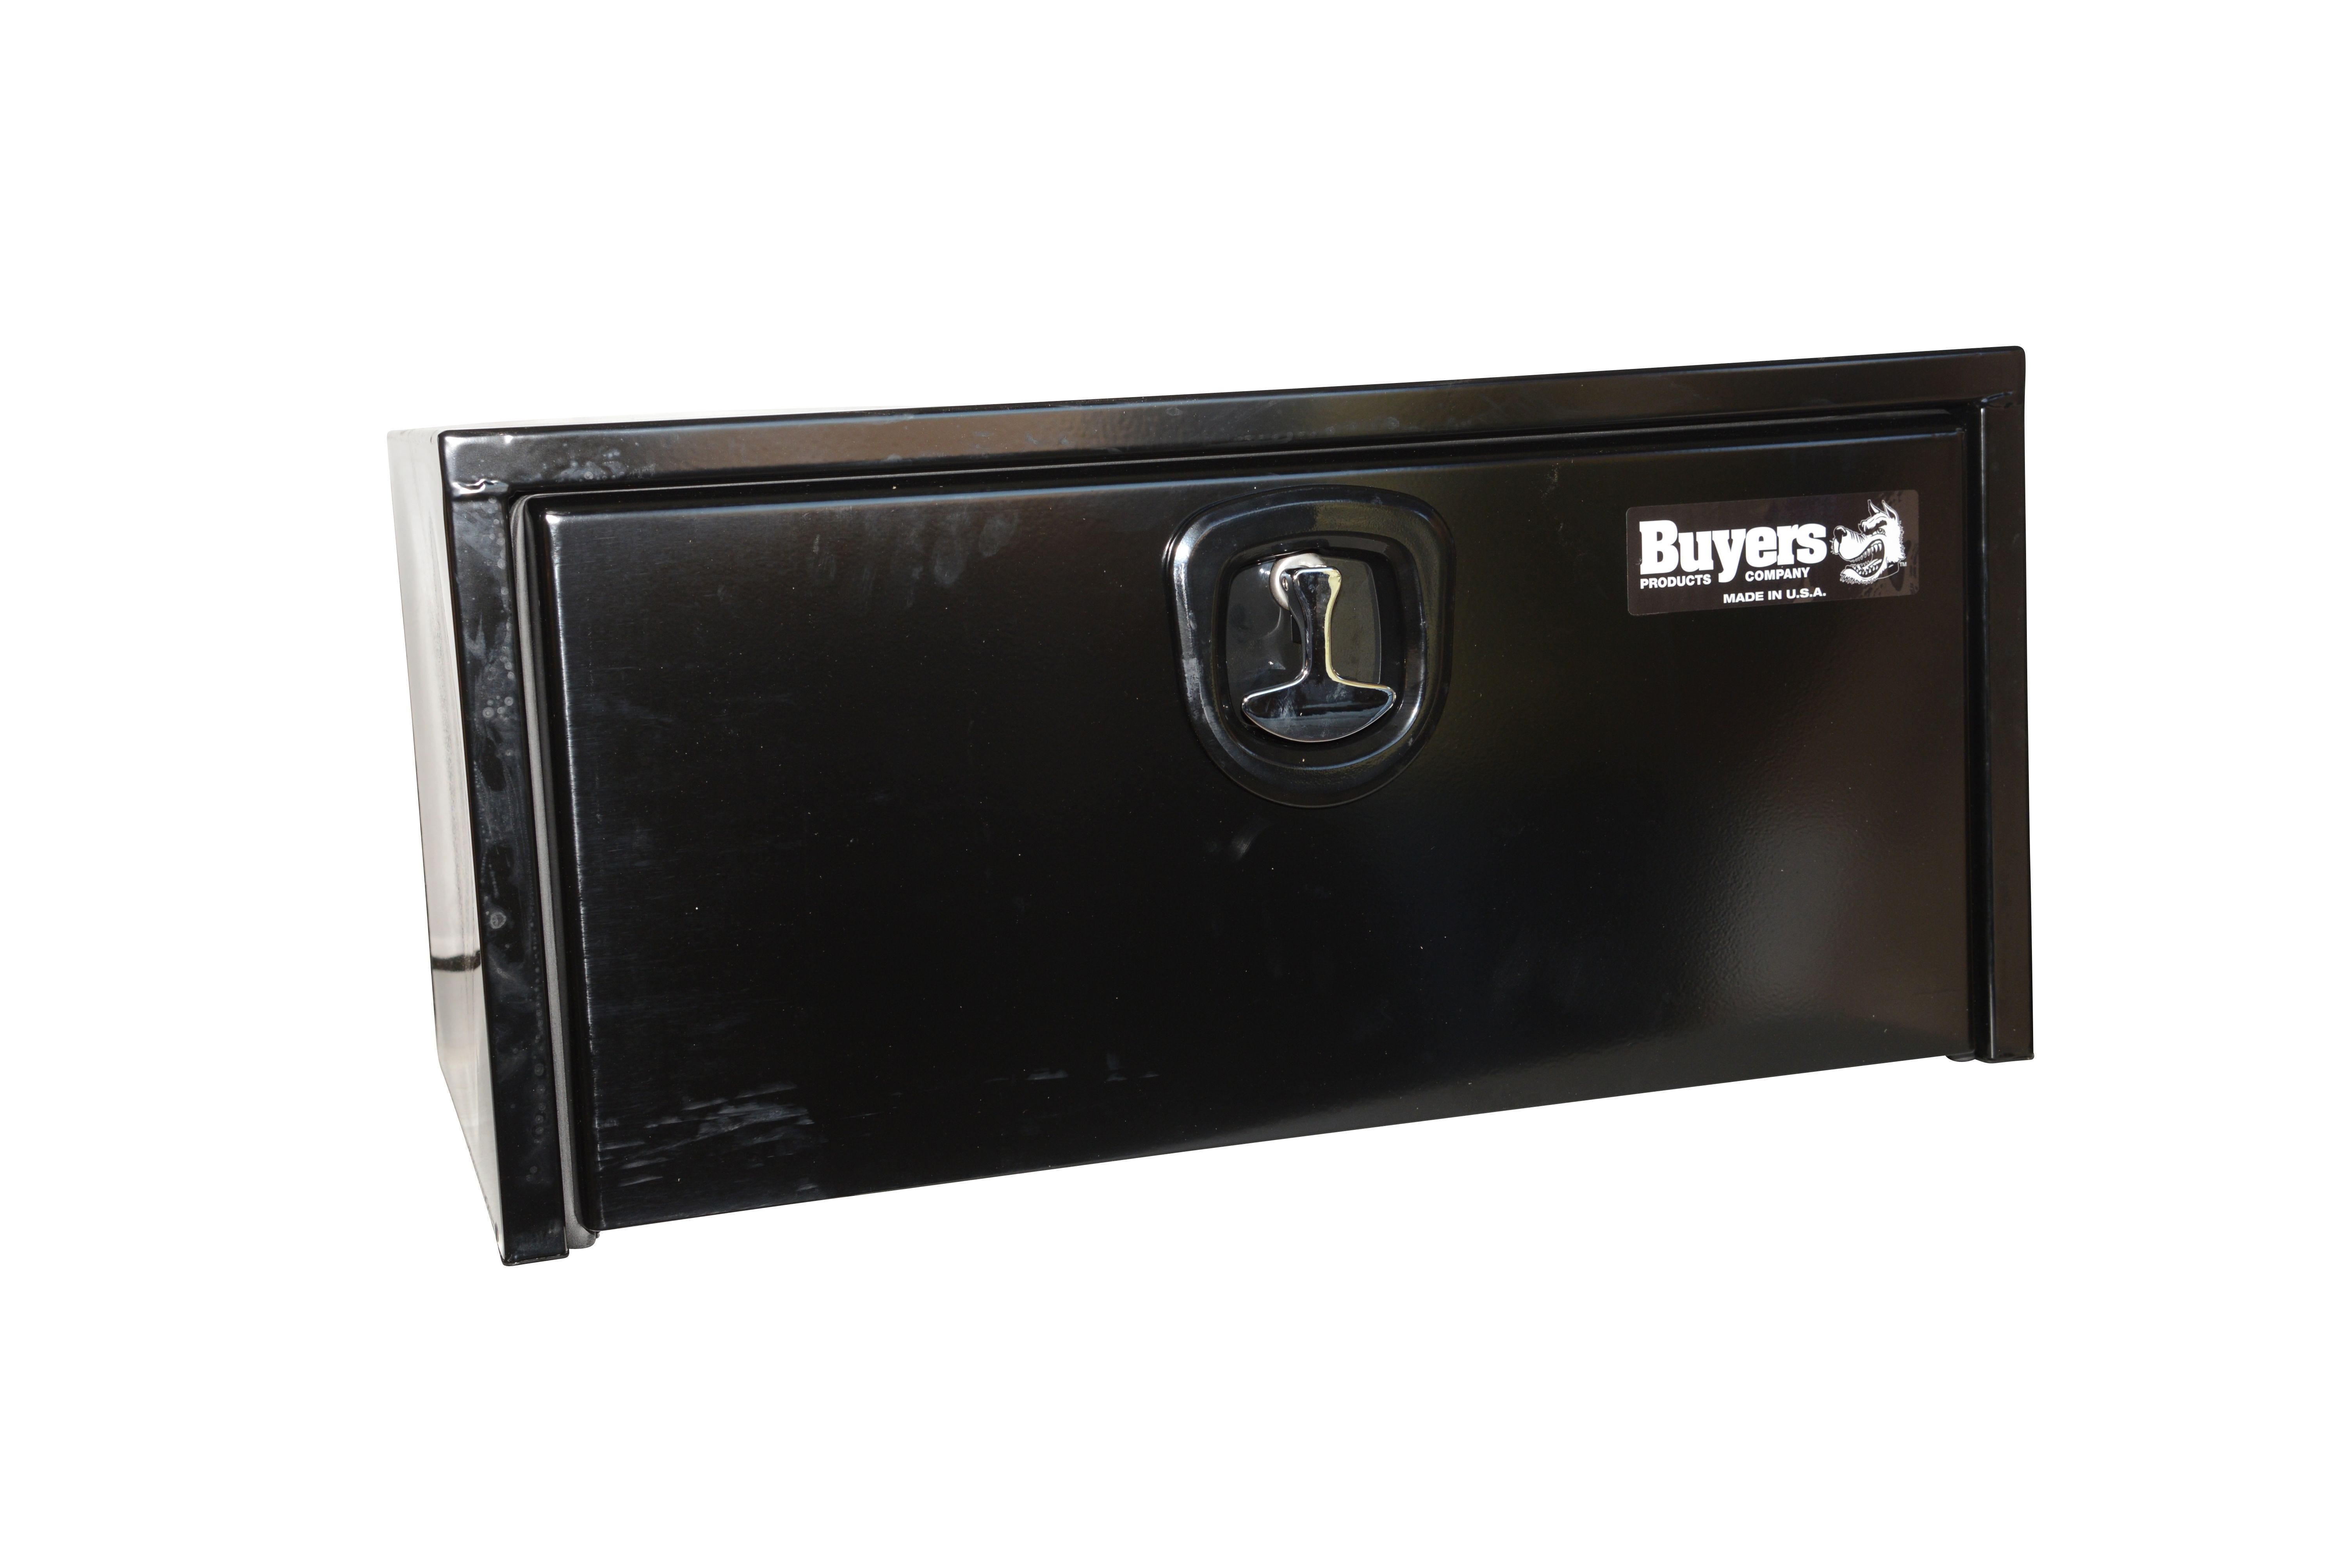 Buyers Powder Coated Steel Underbody Tool Box - 14 Inches Tall x 16 Inches Deep x 30 Inches Long